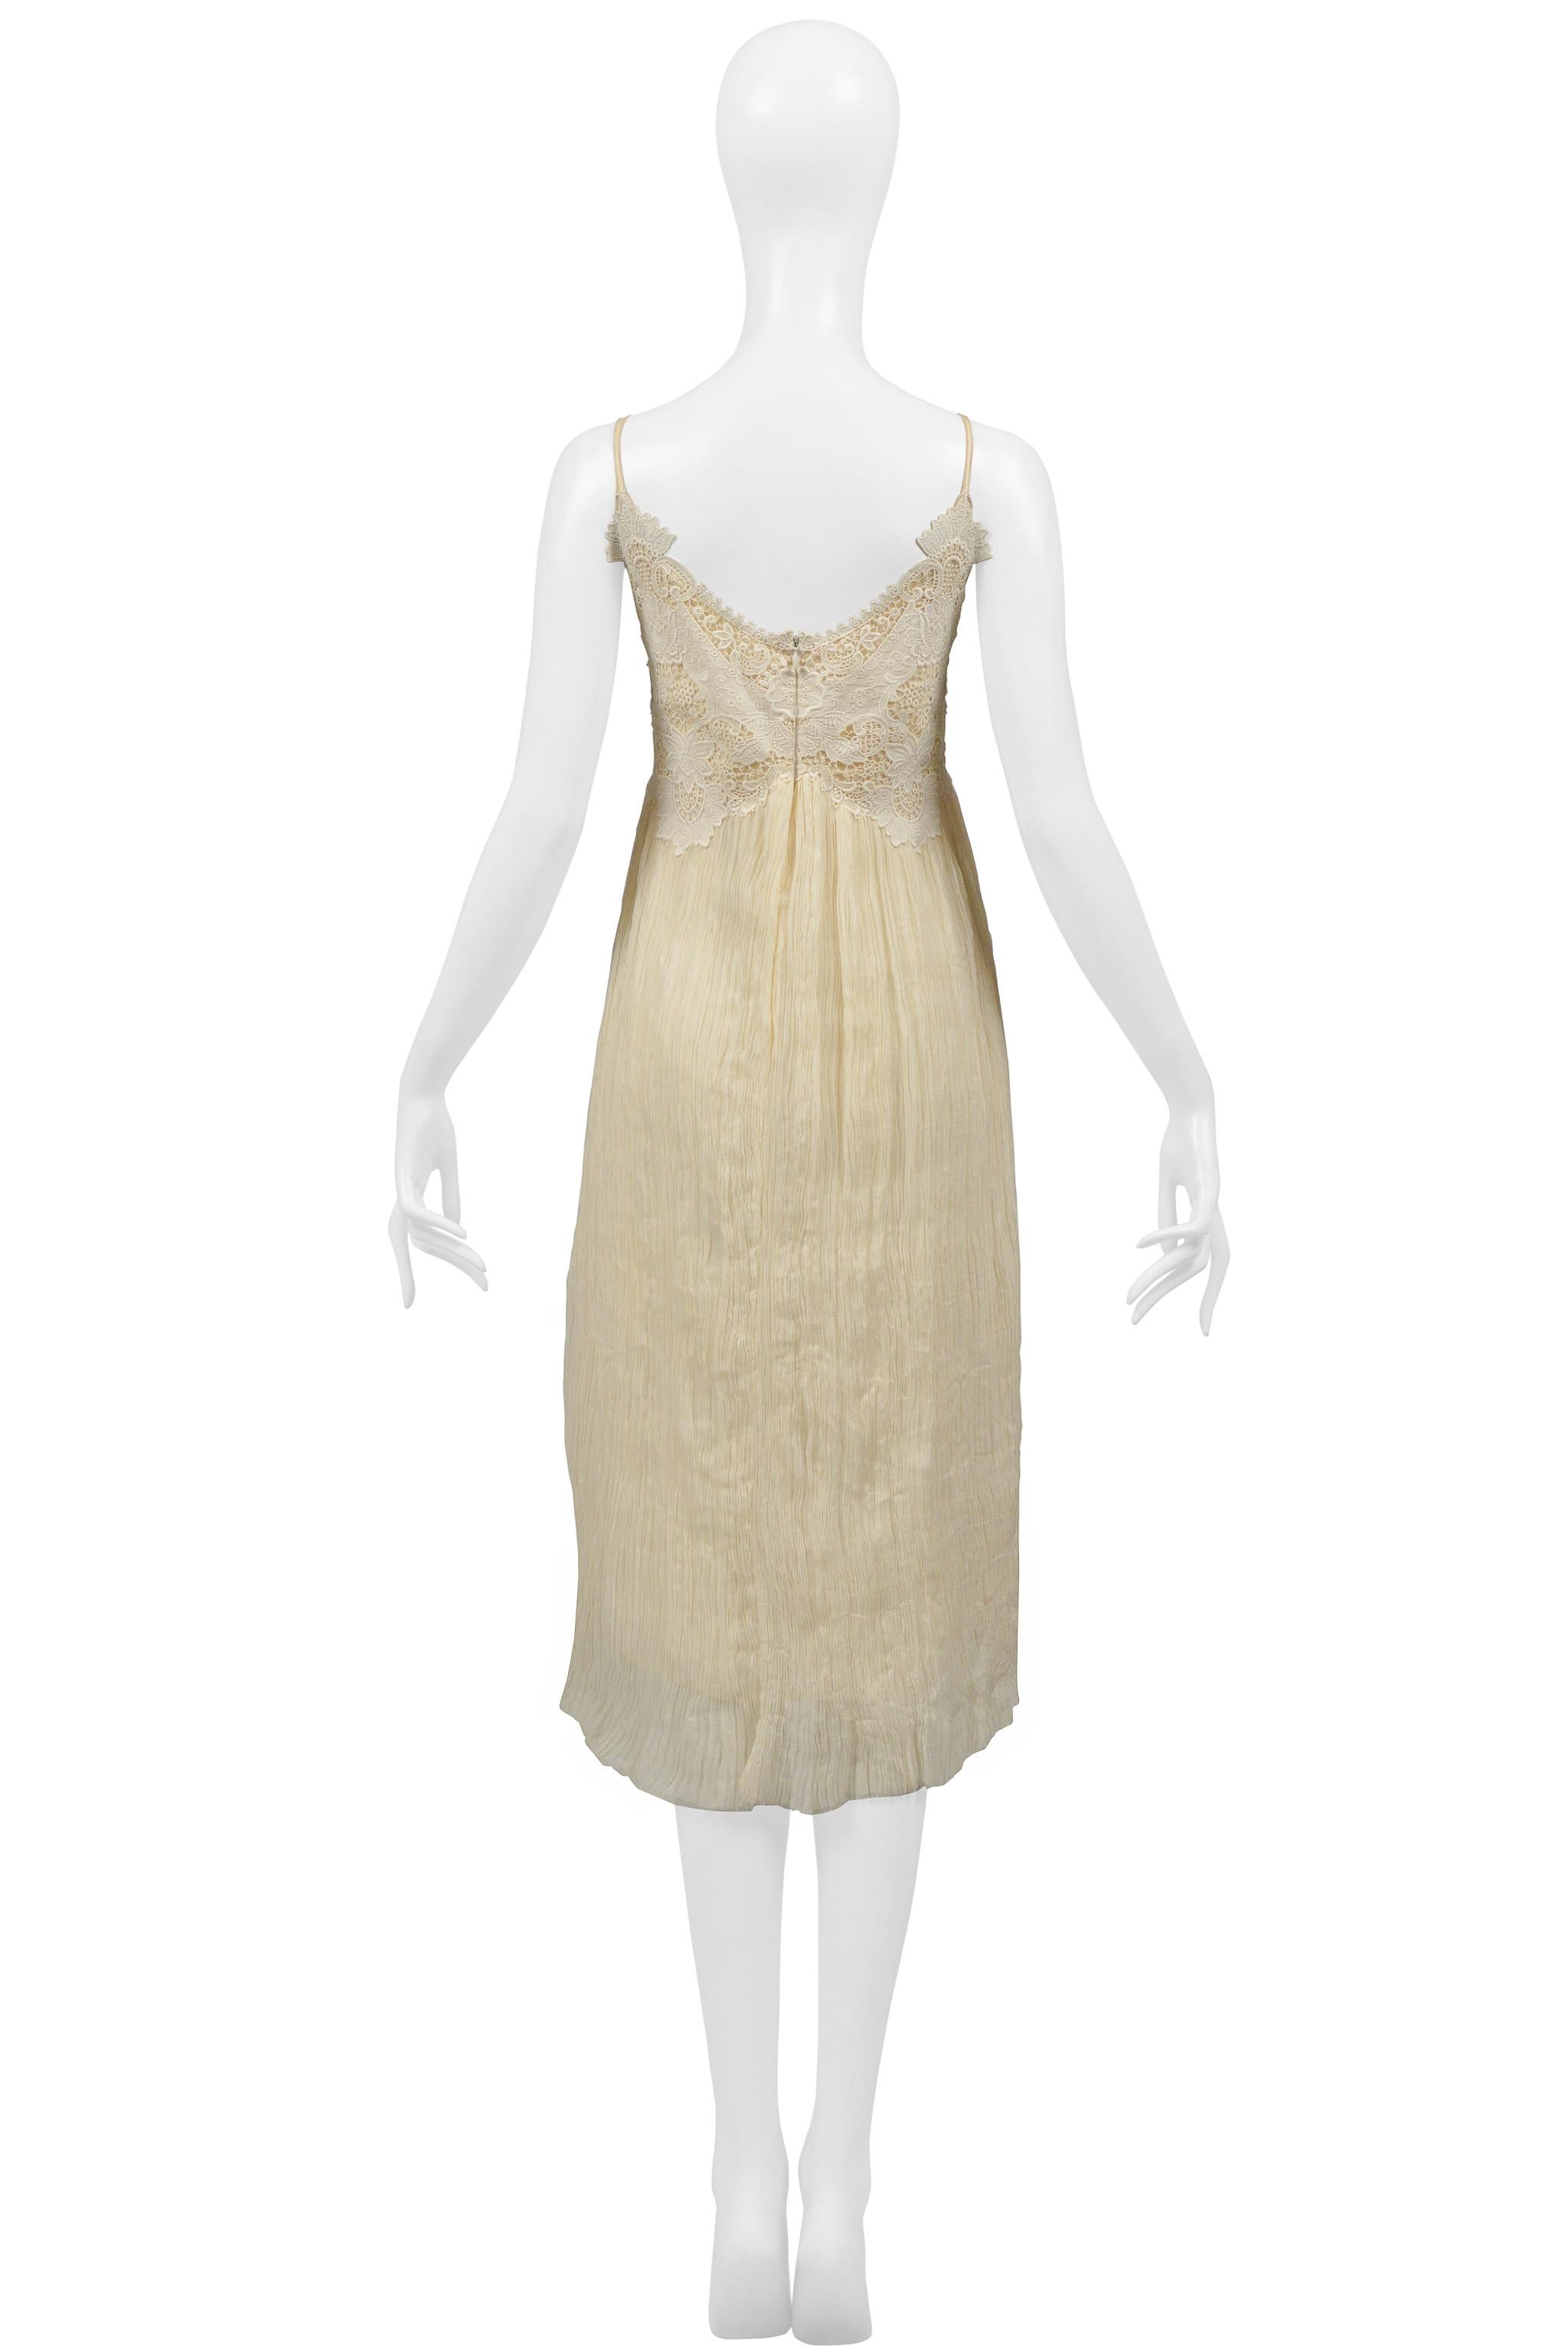 Alexander McQueen Off White Crinkle Dress W Lace Bodice 2005 For Sale 2